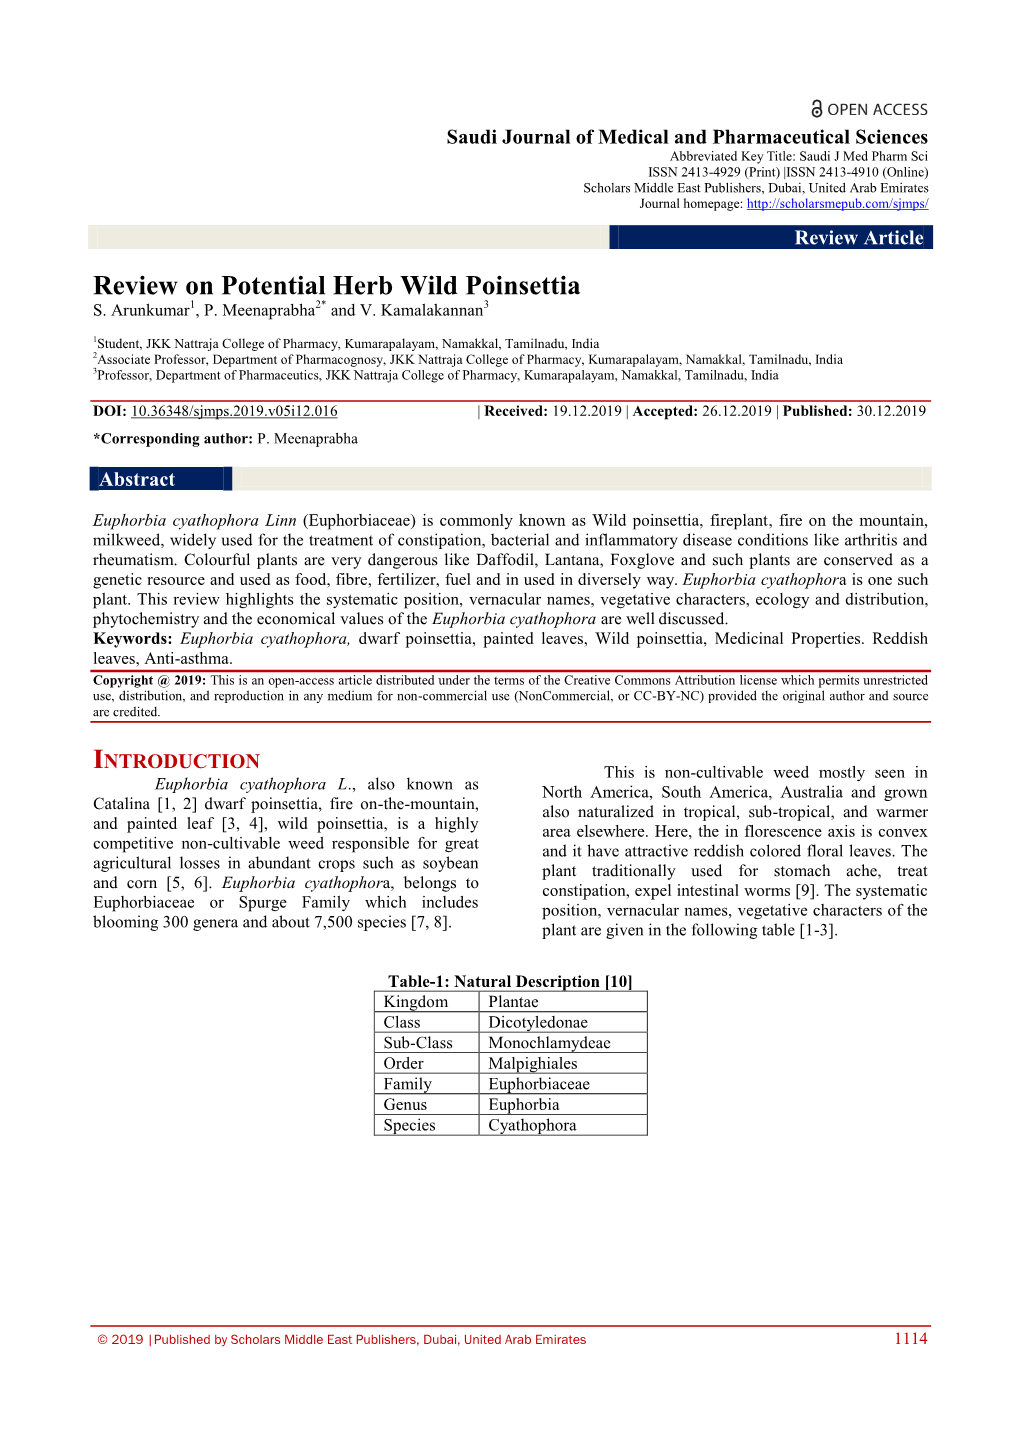 Review on Potential Herb Wild Poinsettia S